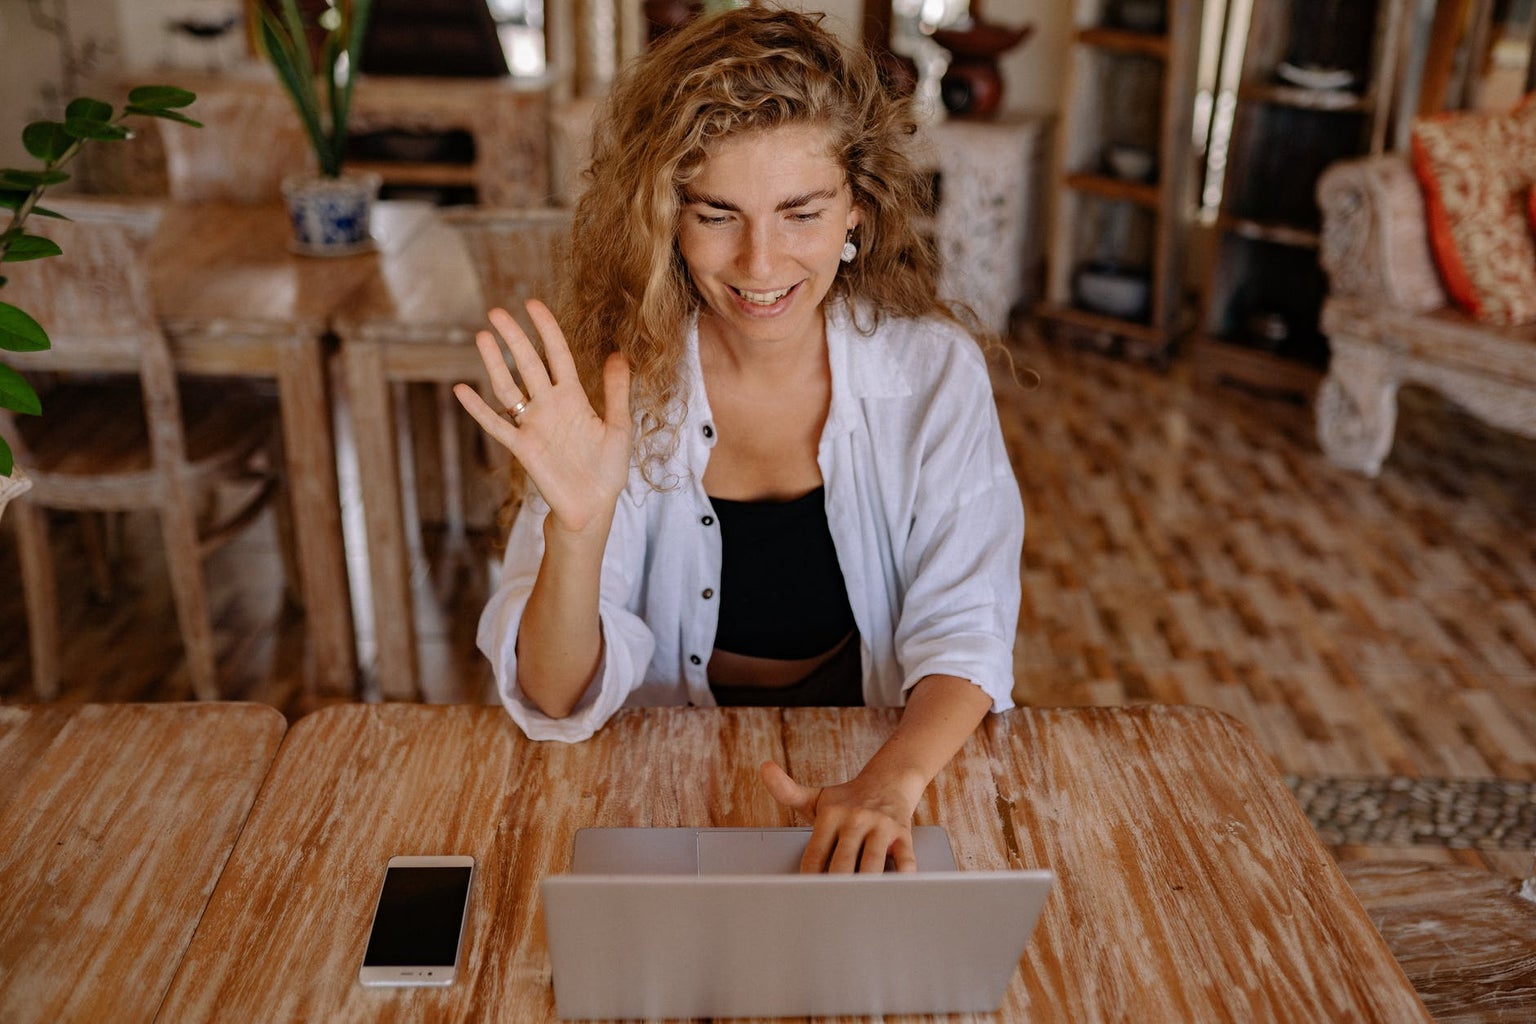 Woman with curly hair waving and saying hi to someone through her laptop.